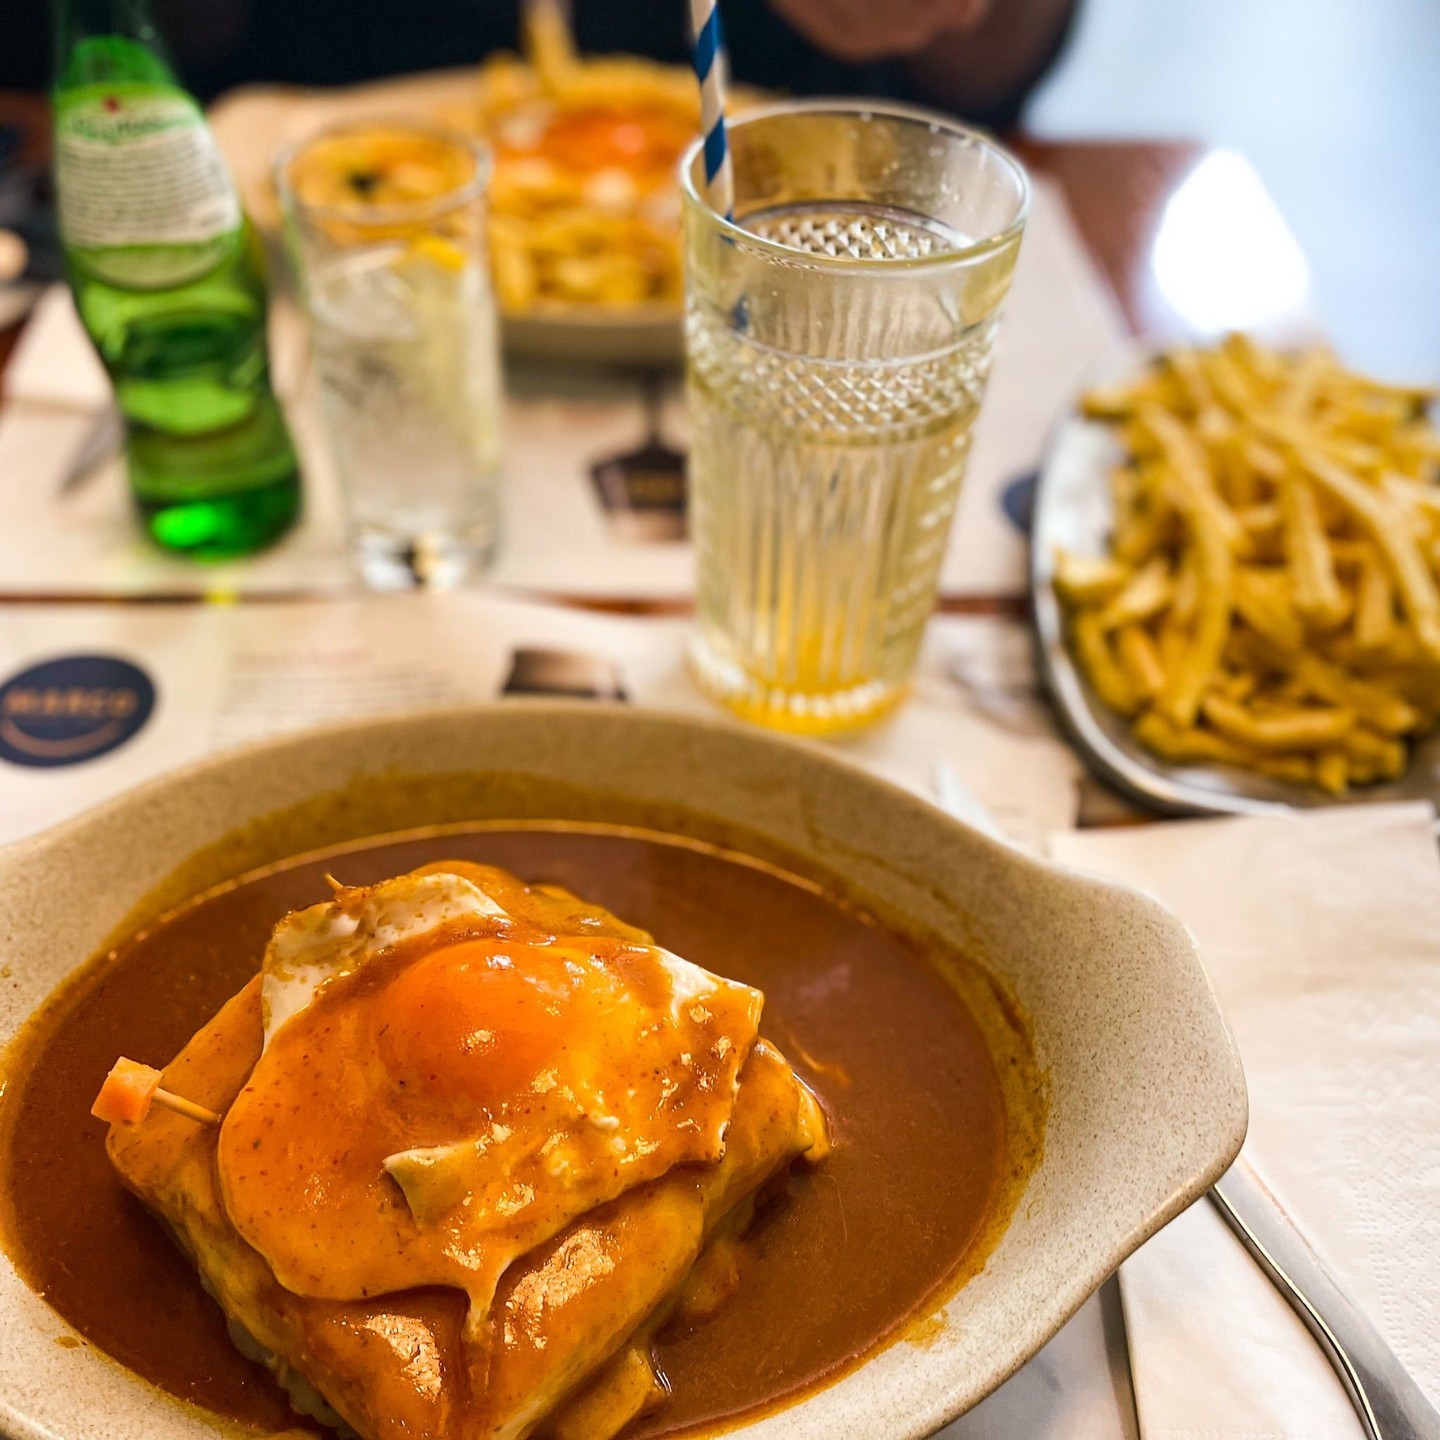 Francesinha. This is a Portuguese sandwich, although it's from further north in the city of Porto.?
?
It's made with bread, many layers of meats (such as wet-cured ham, linguiça, fresh sausage, steak, roast meat) covered with melted cheese and a hot, thick, spiced beer sauce. ?
?
Then, if that wasn't enough richness, meat, and cholesterol, it's served over french fries with an egg on top. ?
?
It's an important dish here in Portugal, and gives a pretty accurate view of how meat-centric Portuguese food can often be. ?
?